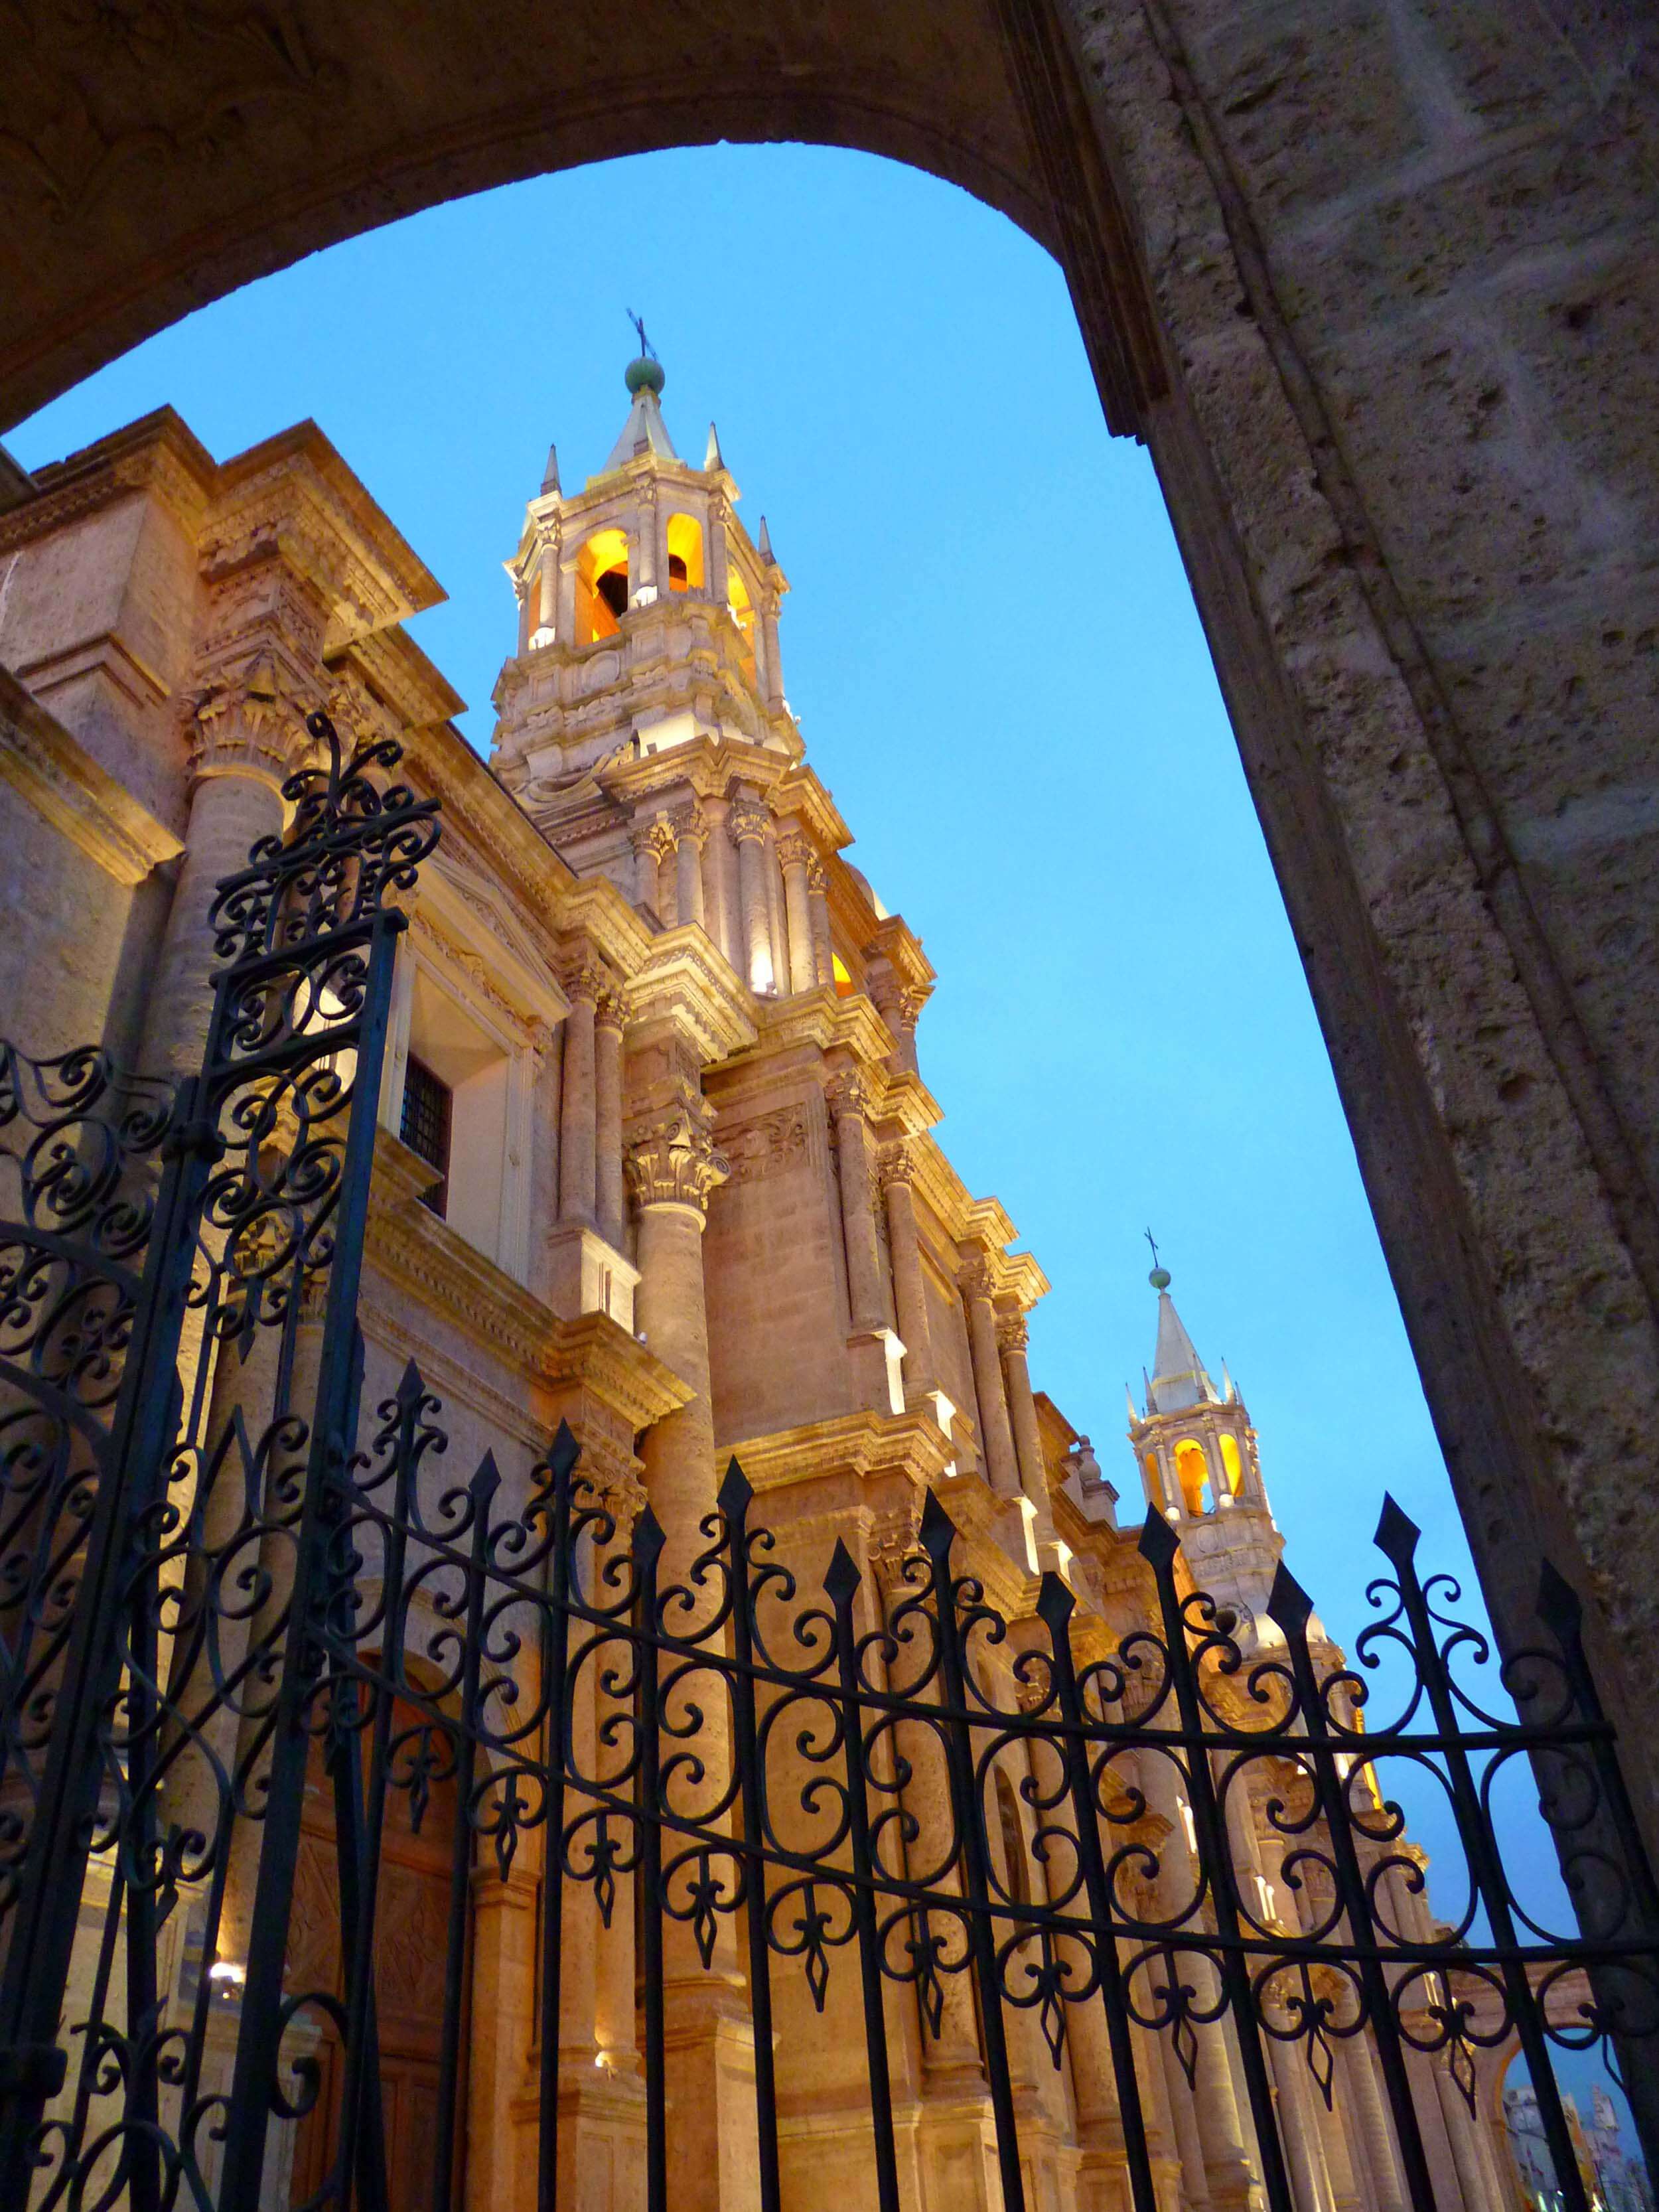 The beautiful cathedral of Arequipa is just two blocks away